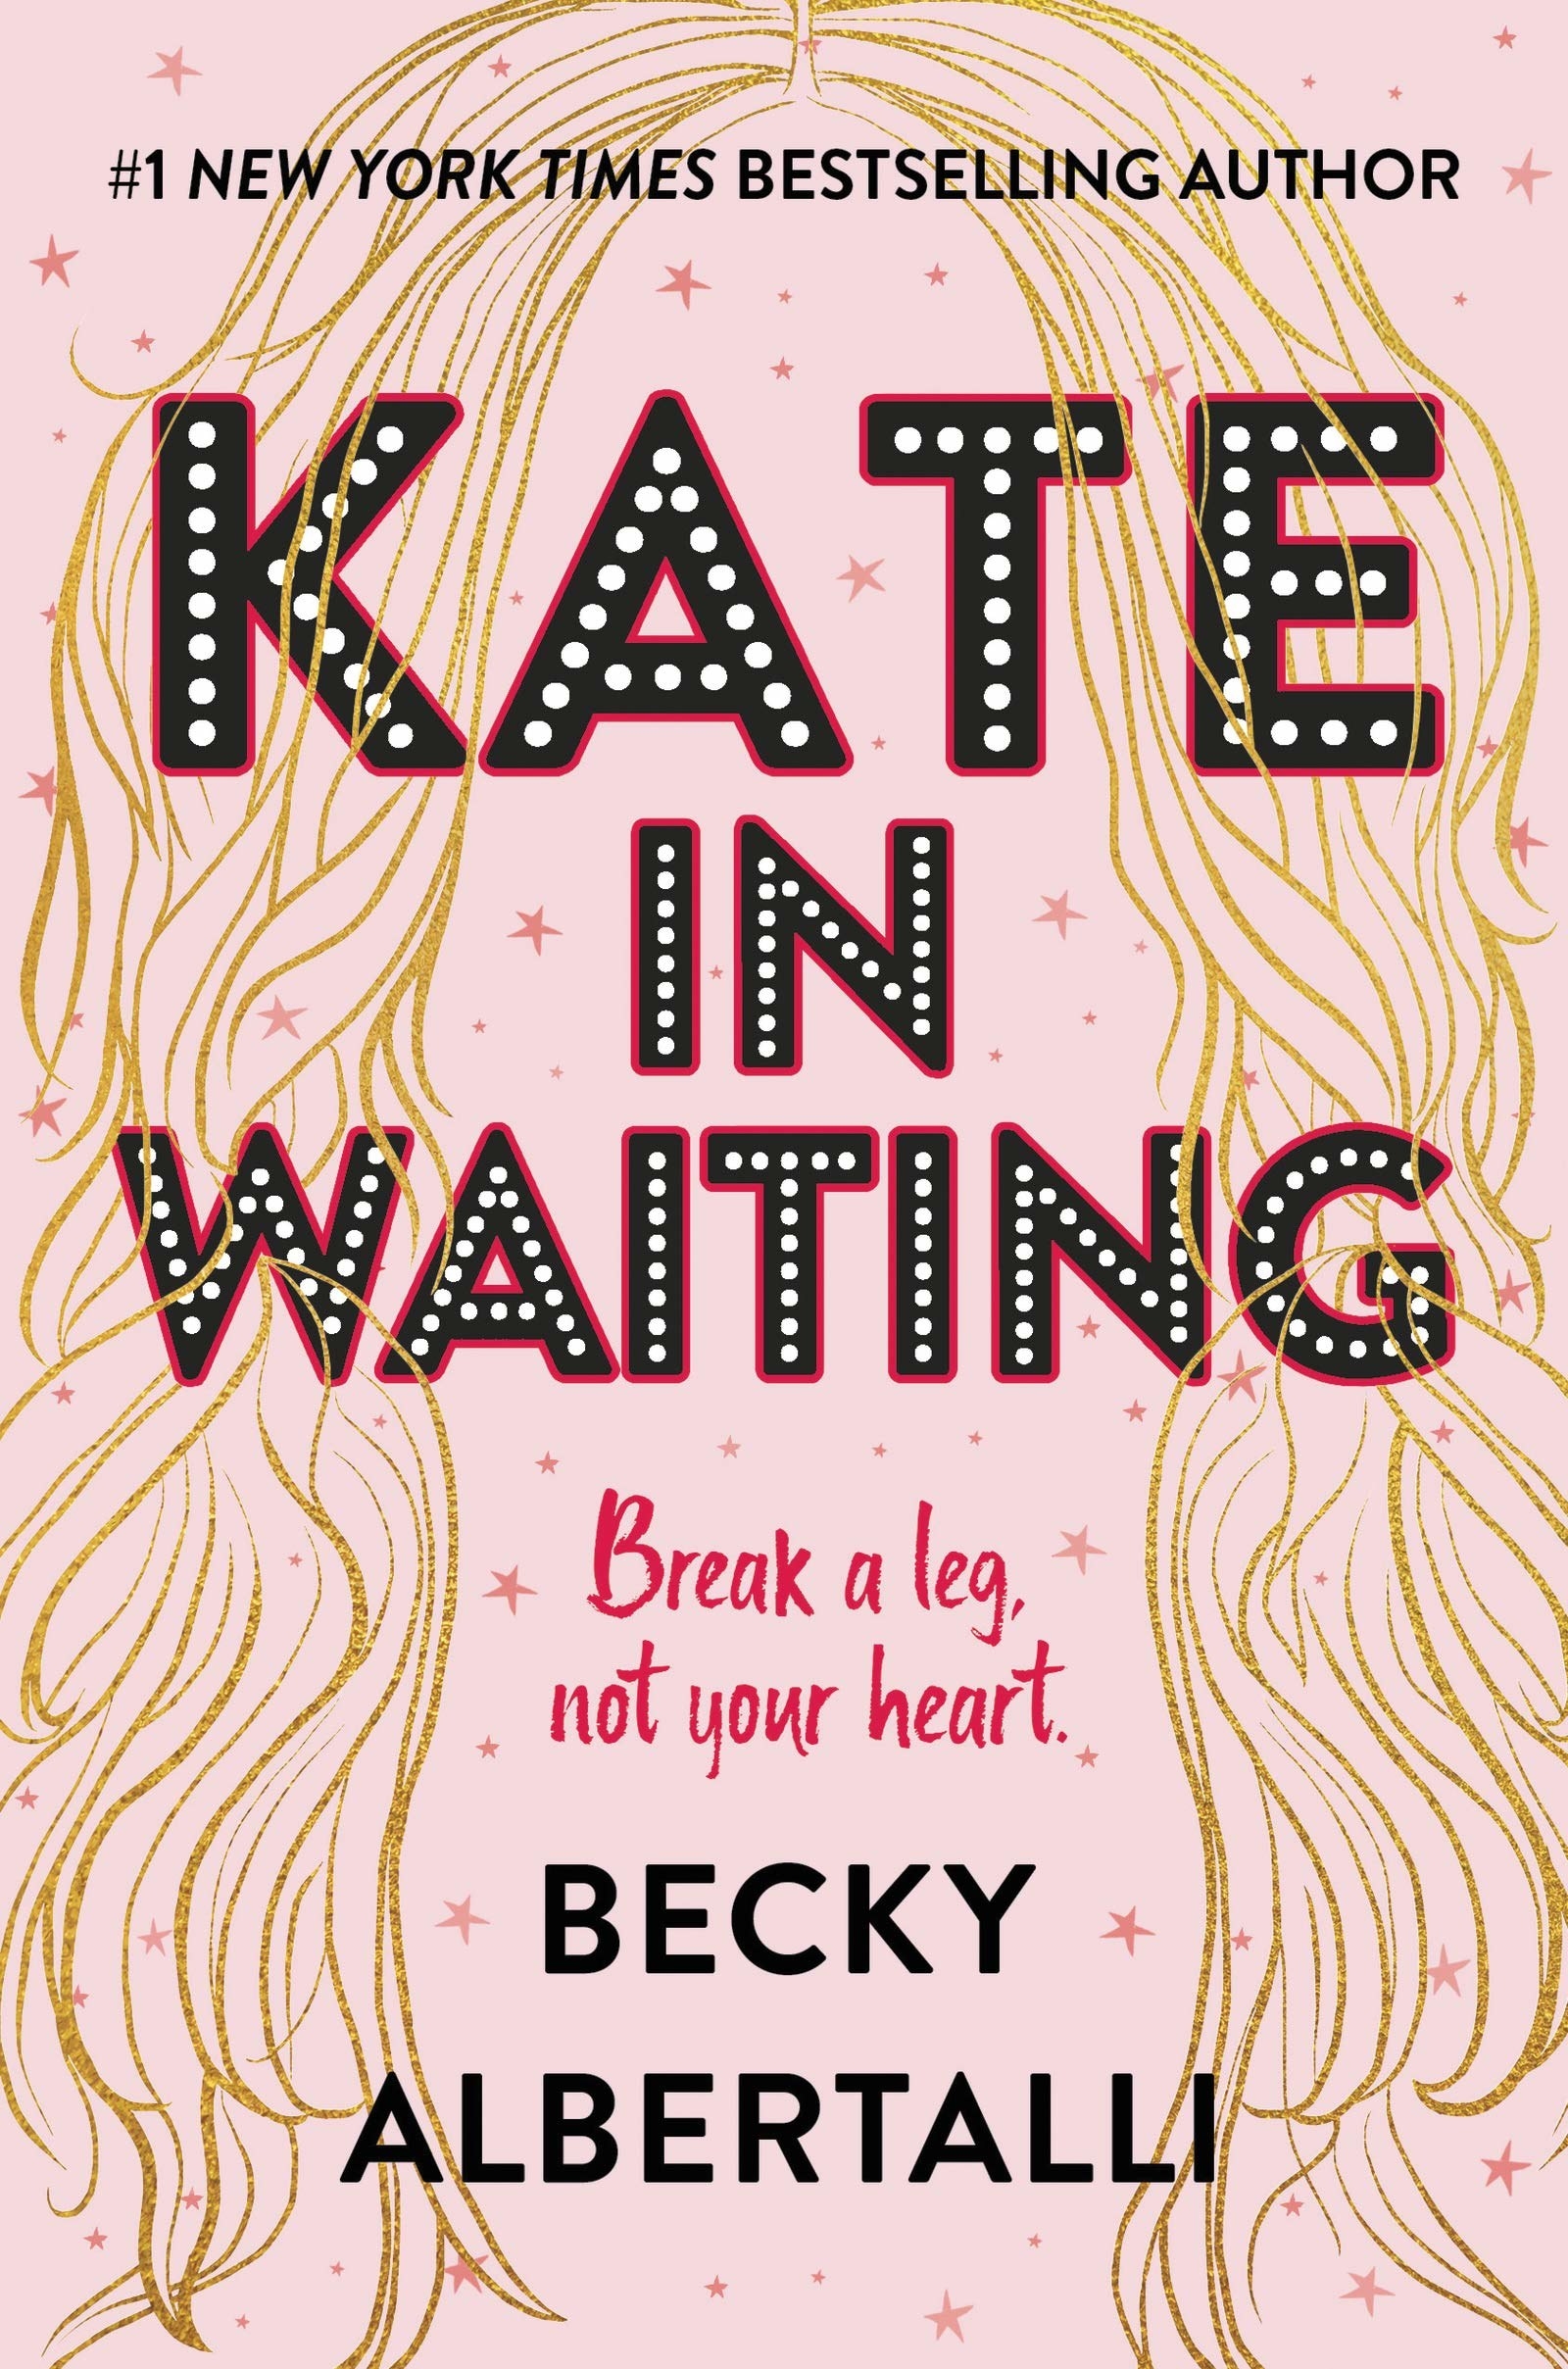 Pale pink cover. Outline of long hair in gold. Title reads: &quot;Kate in Waiting.&quot; Tagline reads: &quot;Break a leg, not your heart.&quot;